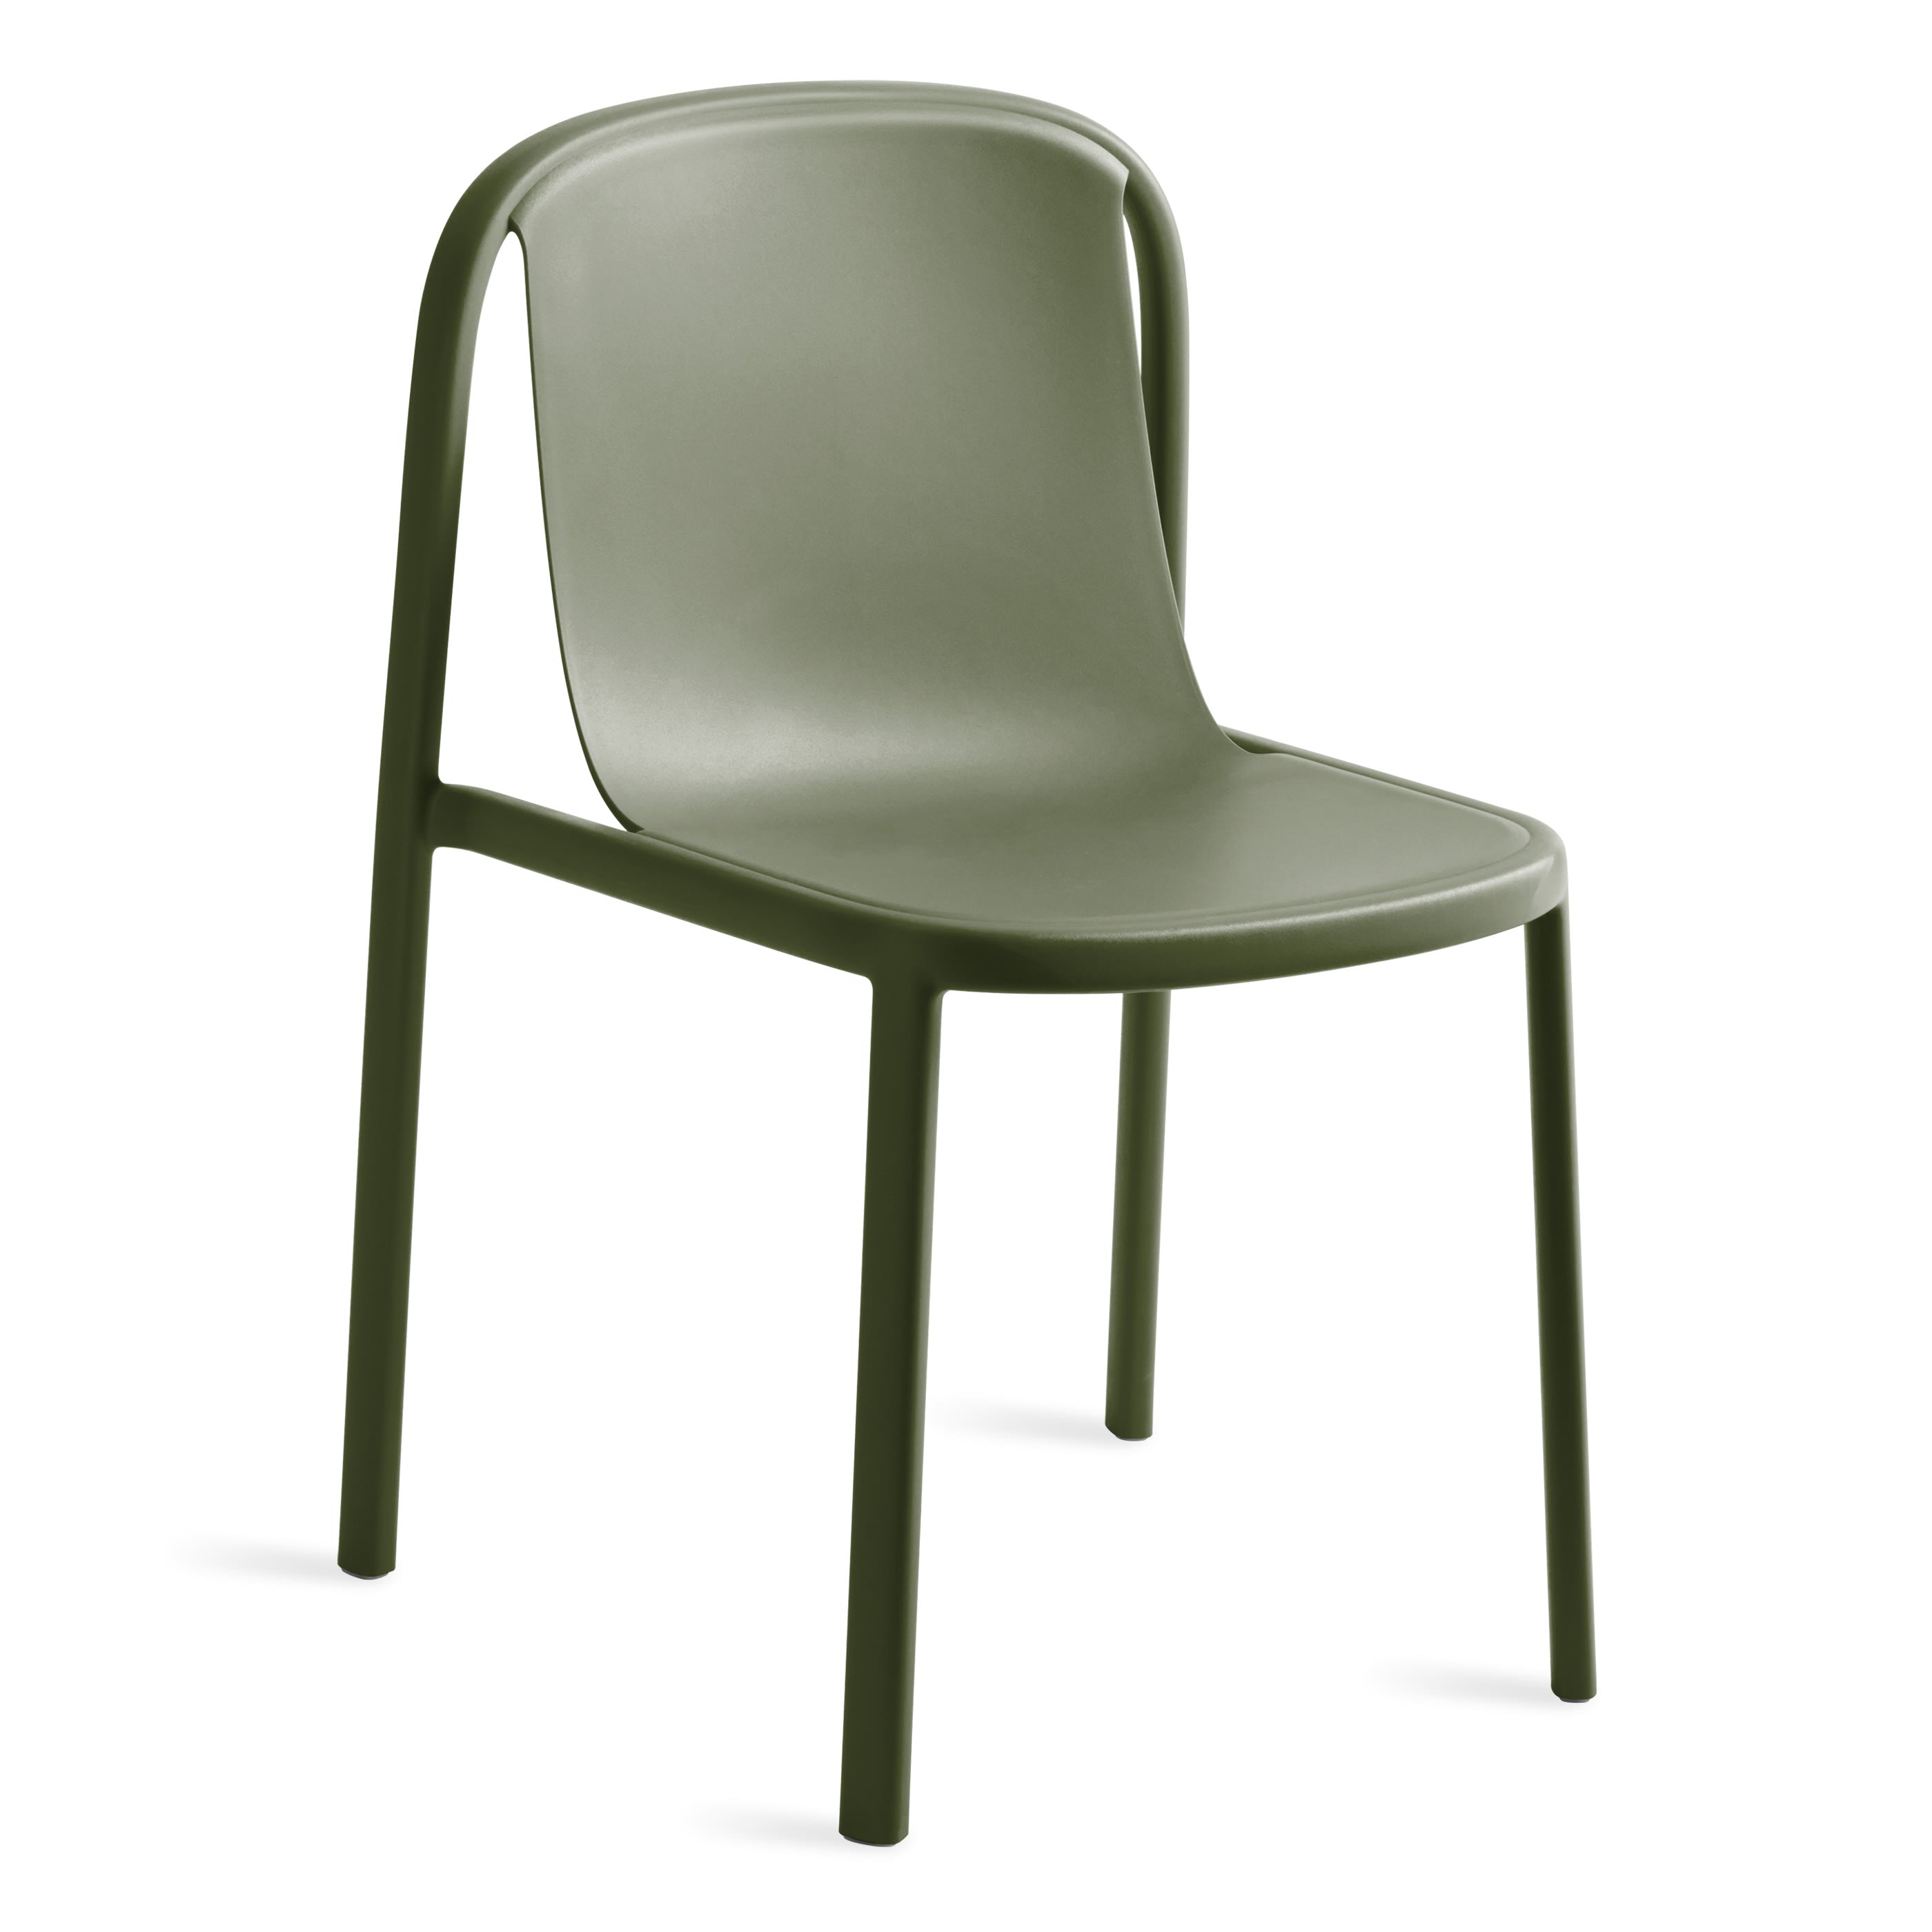 Image of Decade Chair